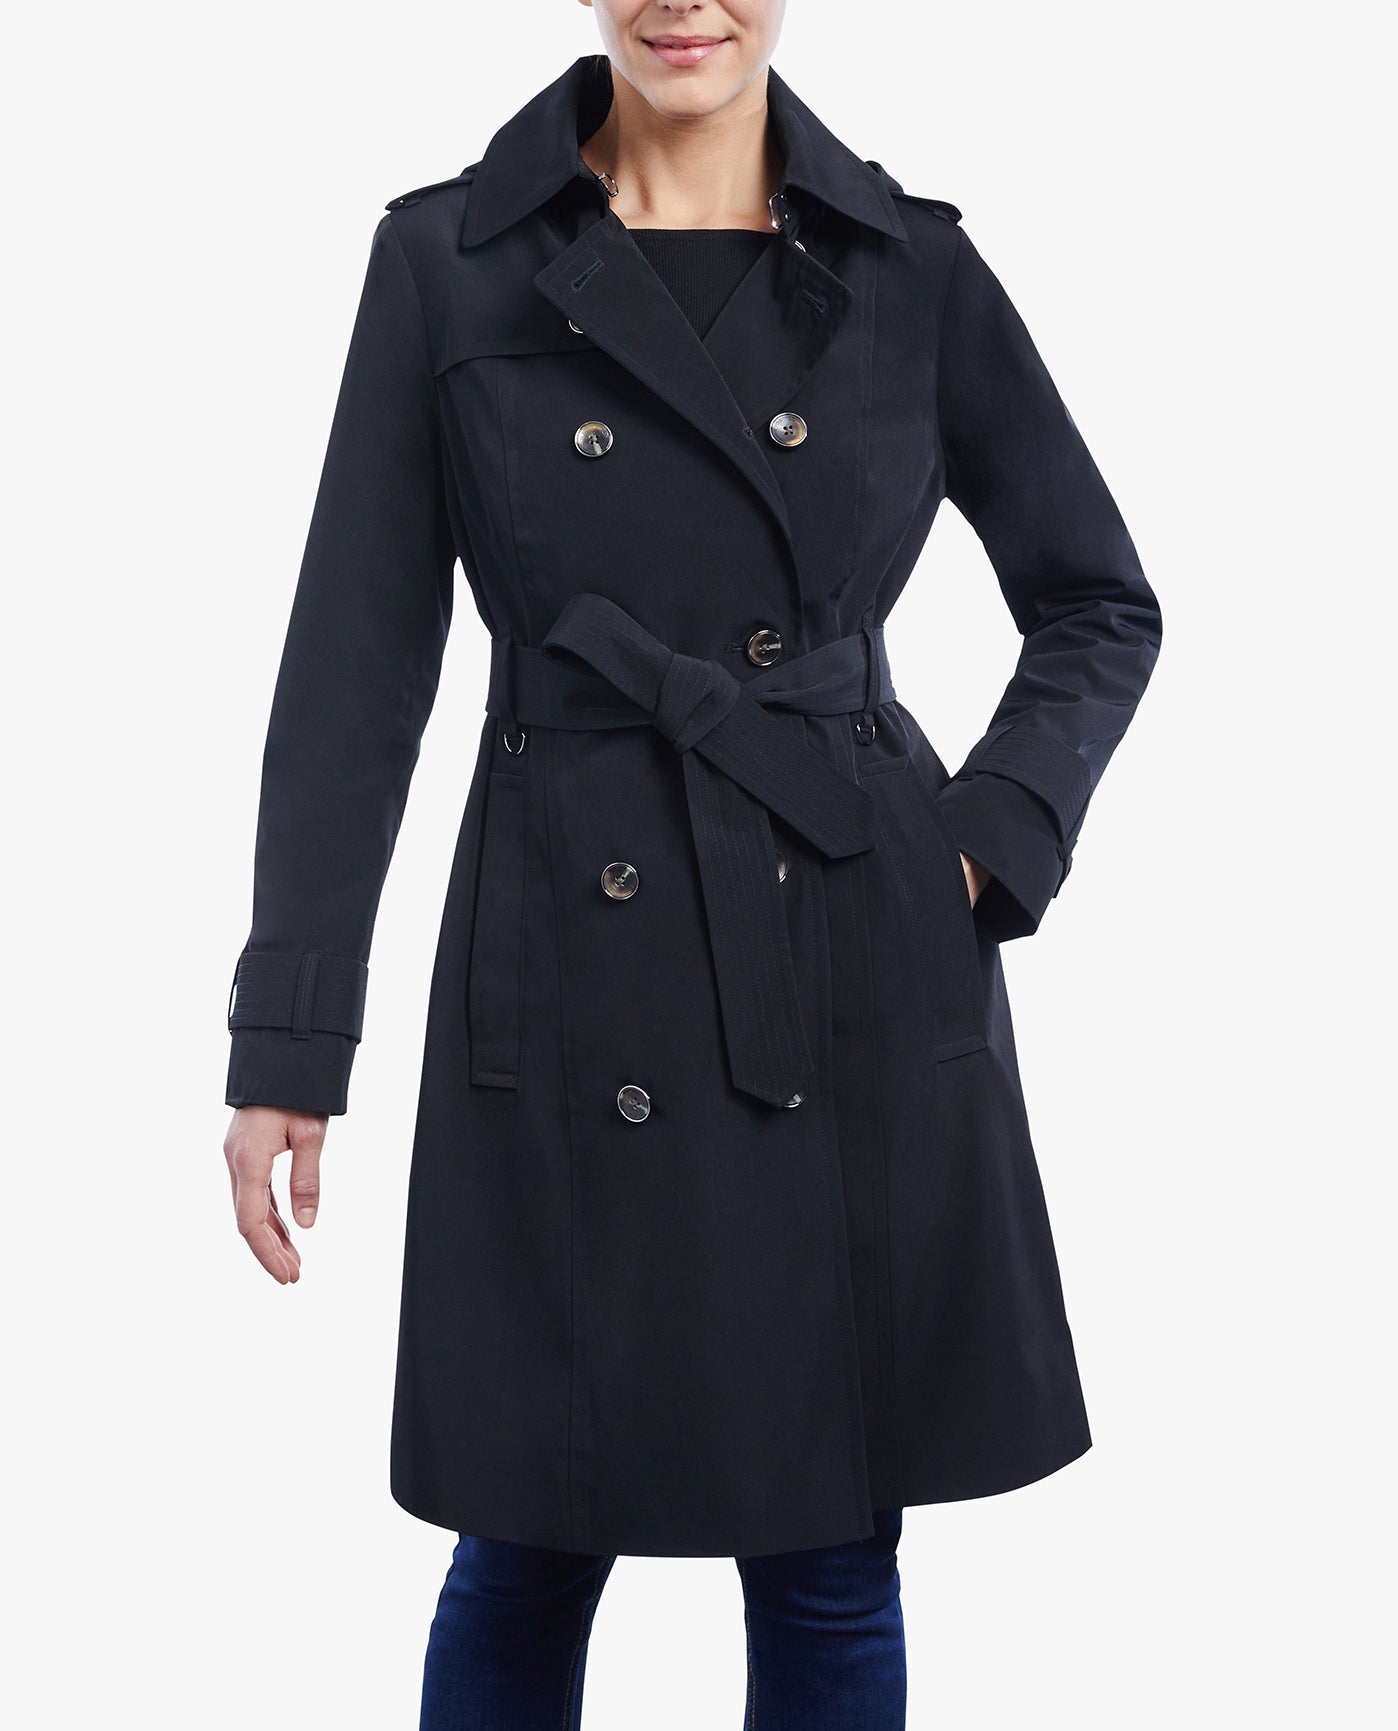 FRONT OF DOUBLE BREASTED BUTTON FRONT TRENCH WITH BELT | BLACK